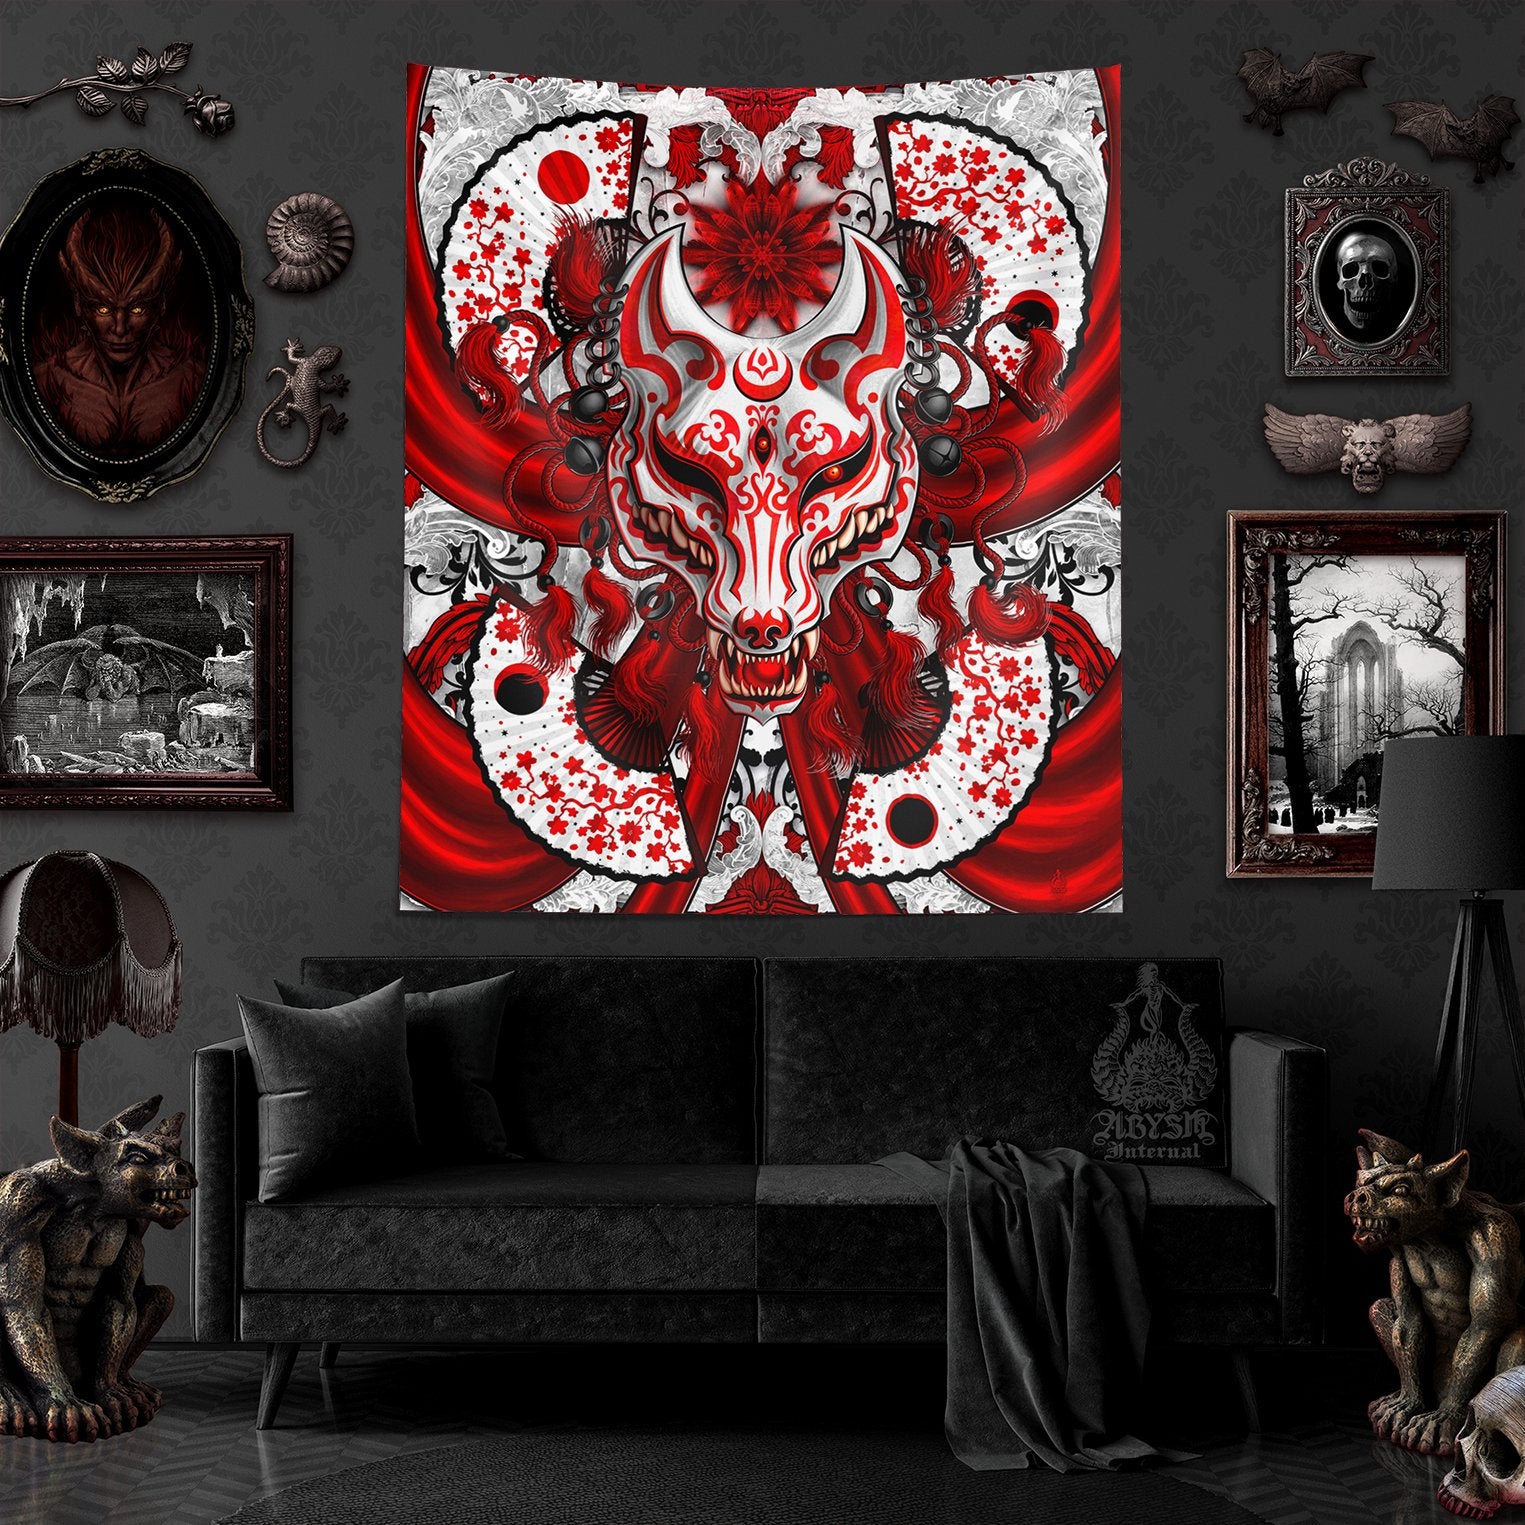 Kitsune Tapestry, Goth Wall Hanging, Anime and Gamer Home Decor,, Okami, Fox Mask - Bloody White - Abysm Internal